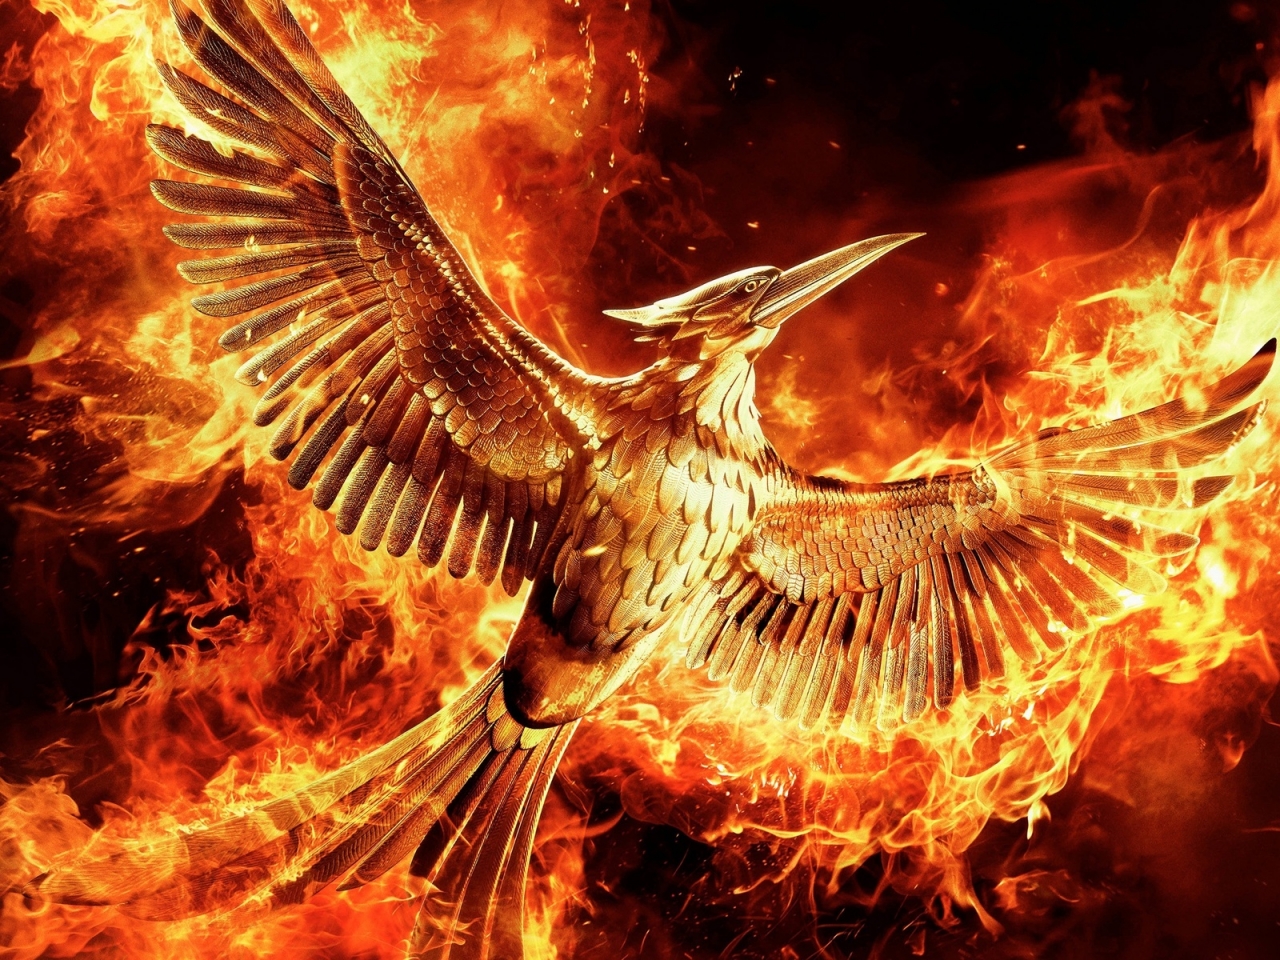 The Hunger Games Mockingjay Part 2 for 1280 x 960 resolution